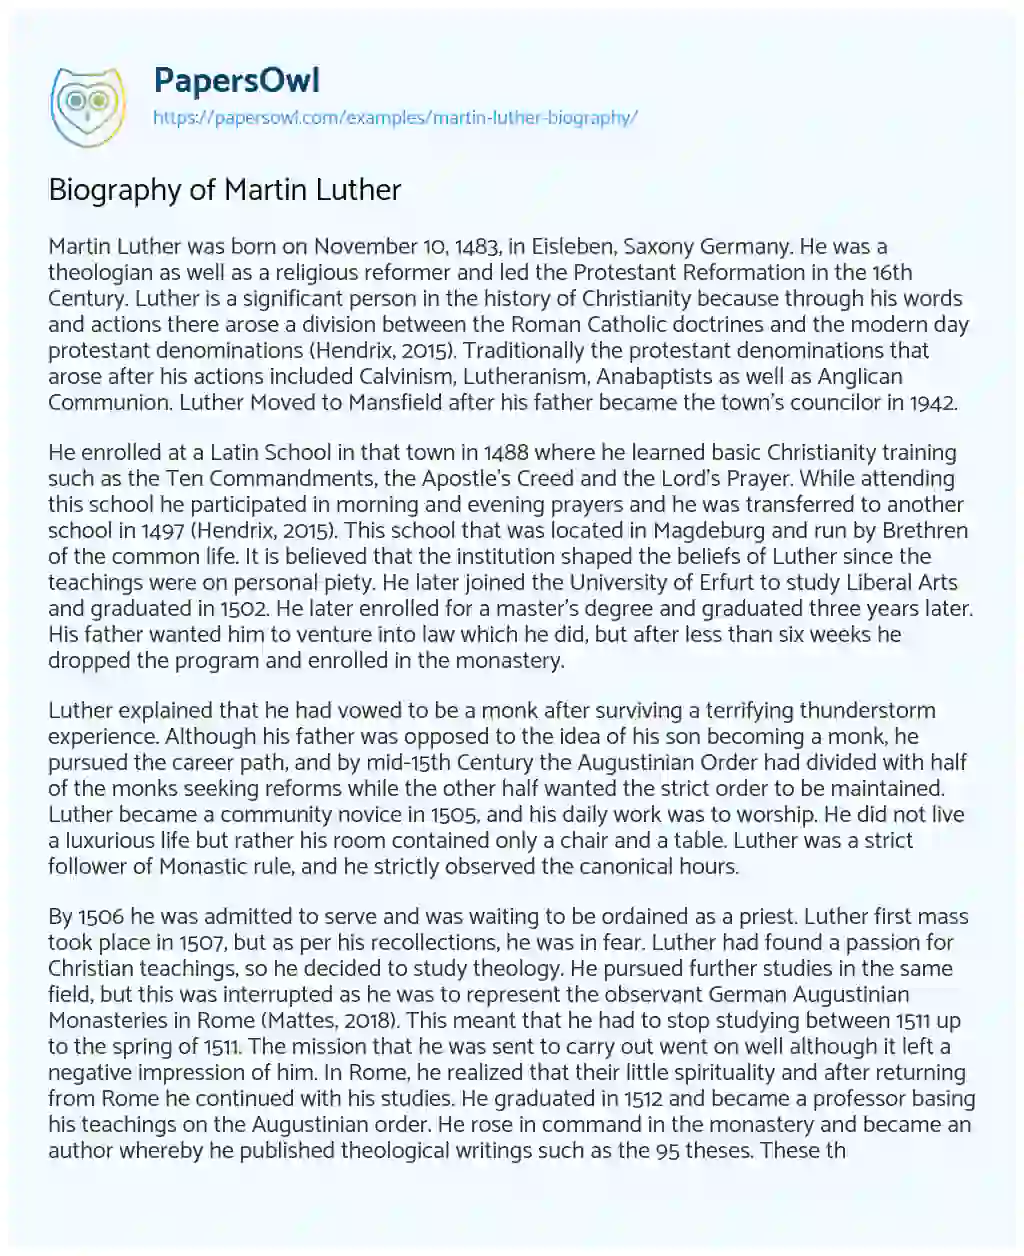 Essay on Biography of Martin Luther